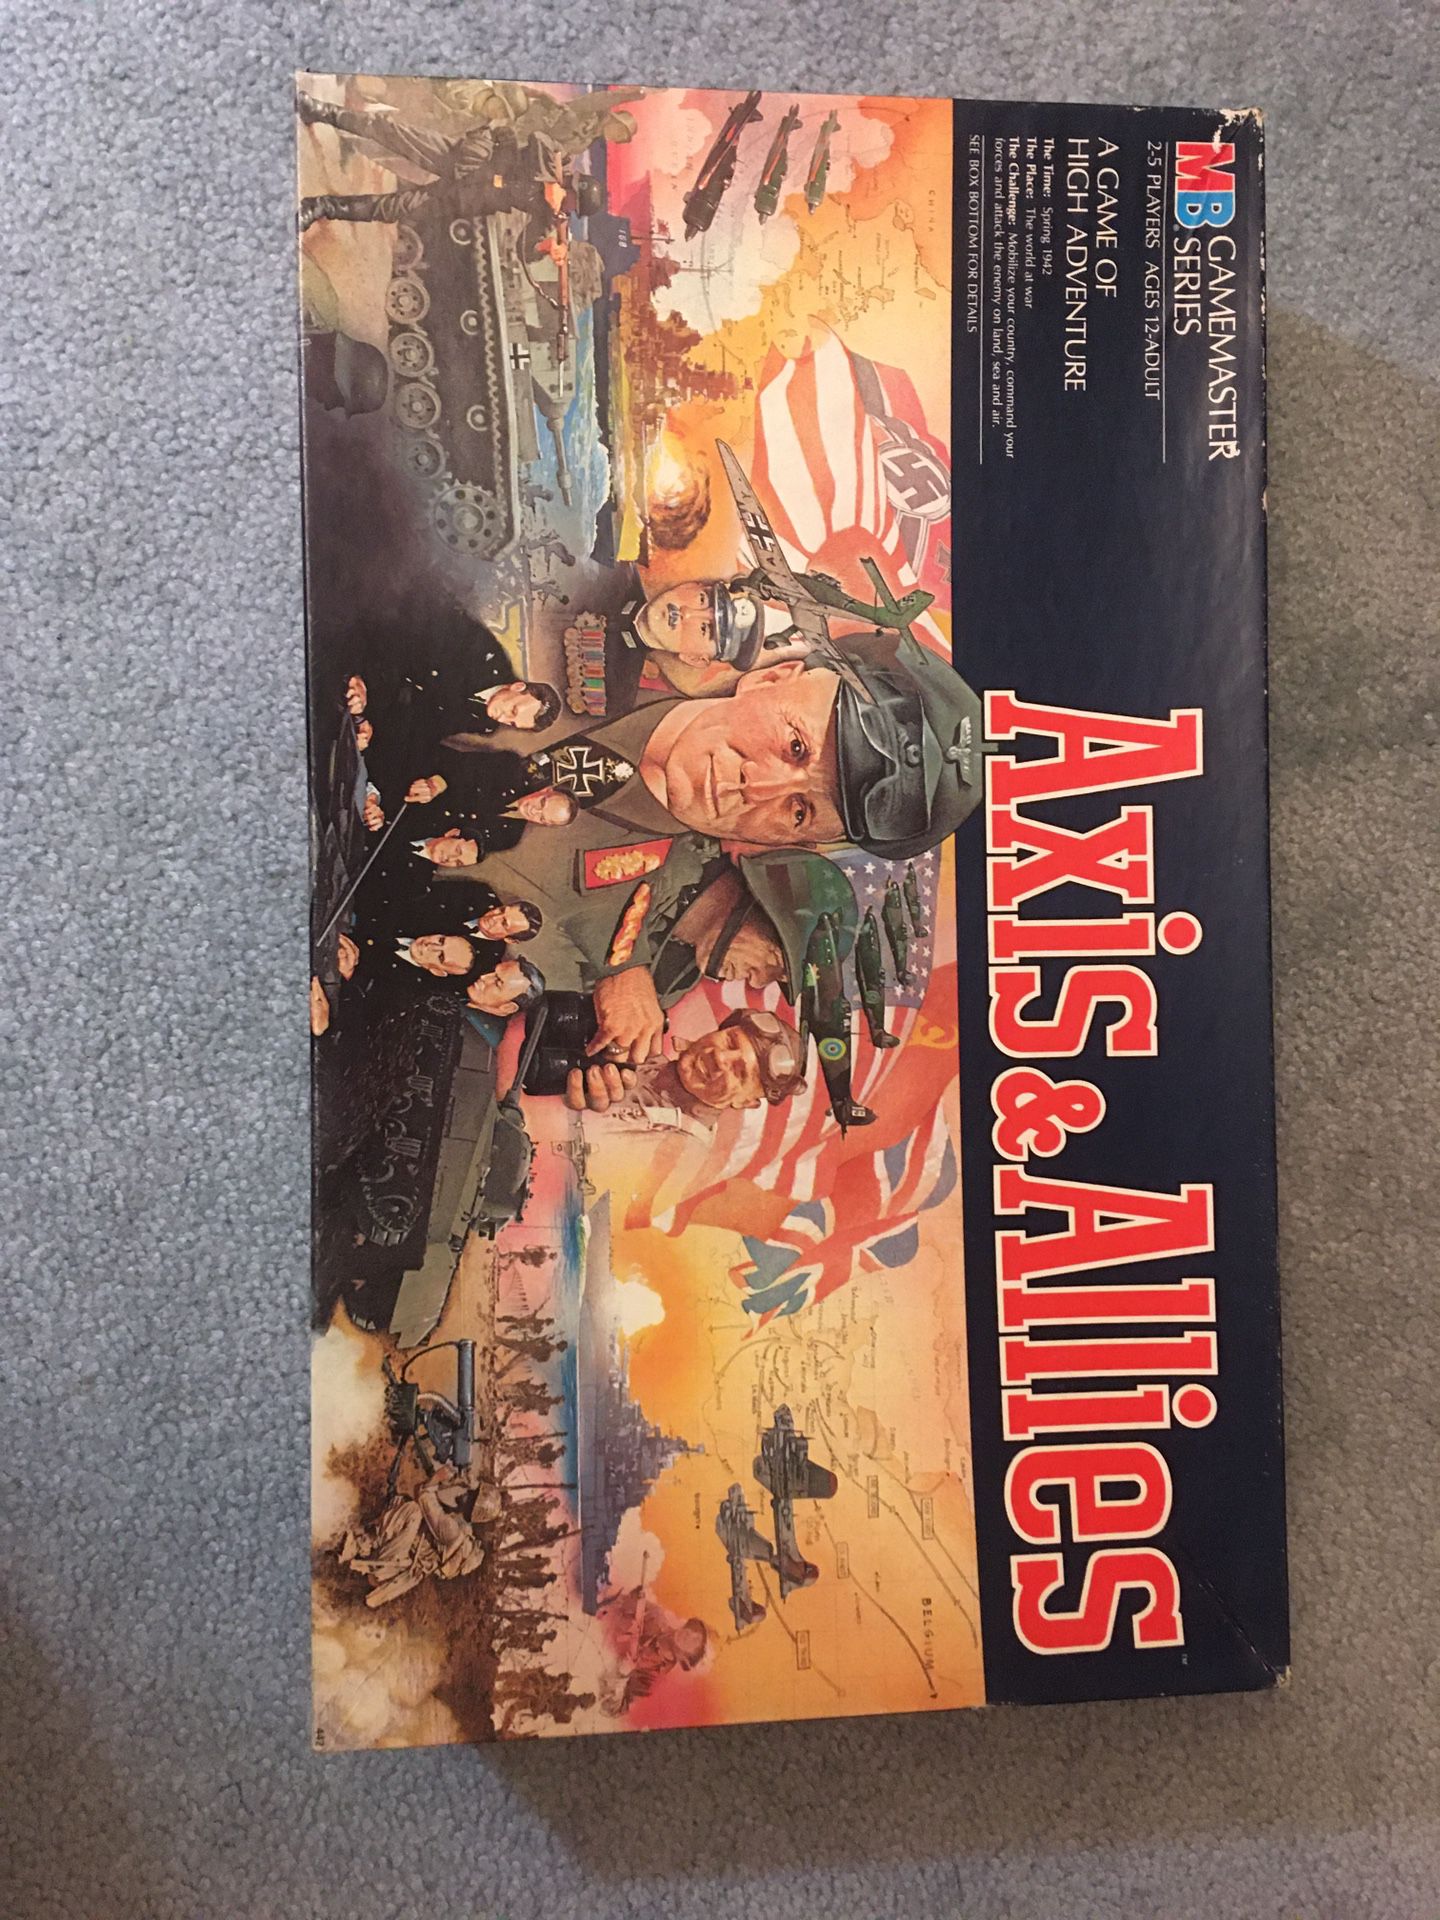 Axis & Allies classic board game